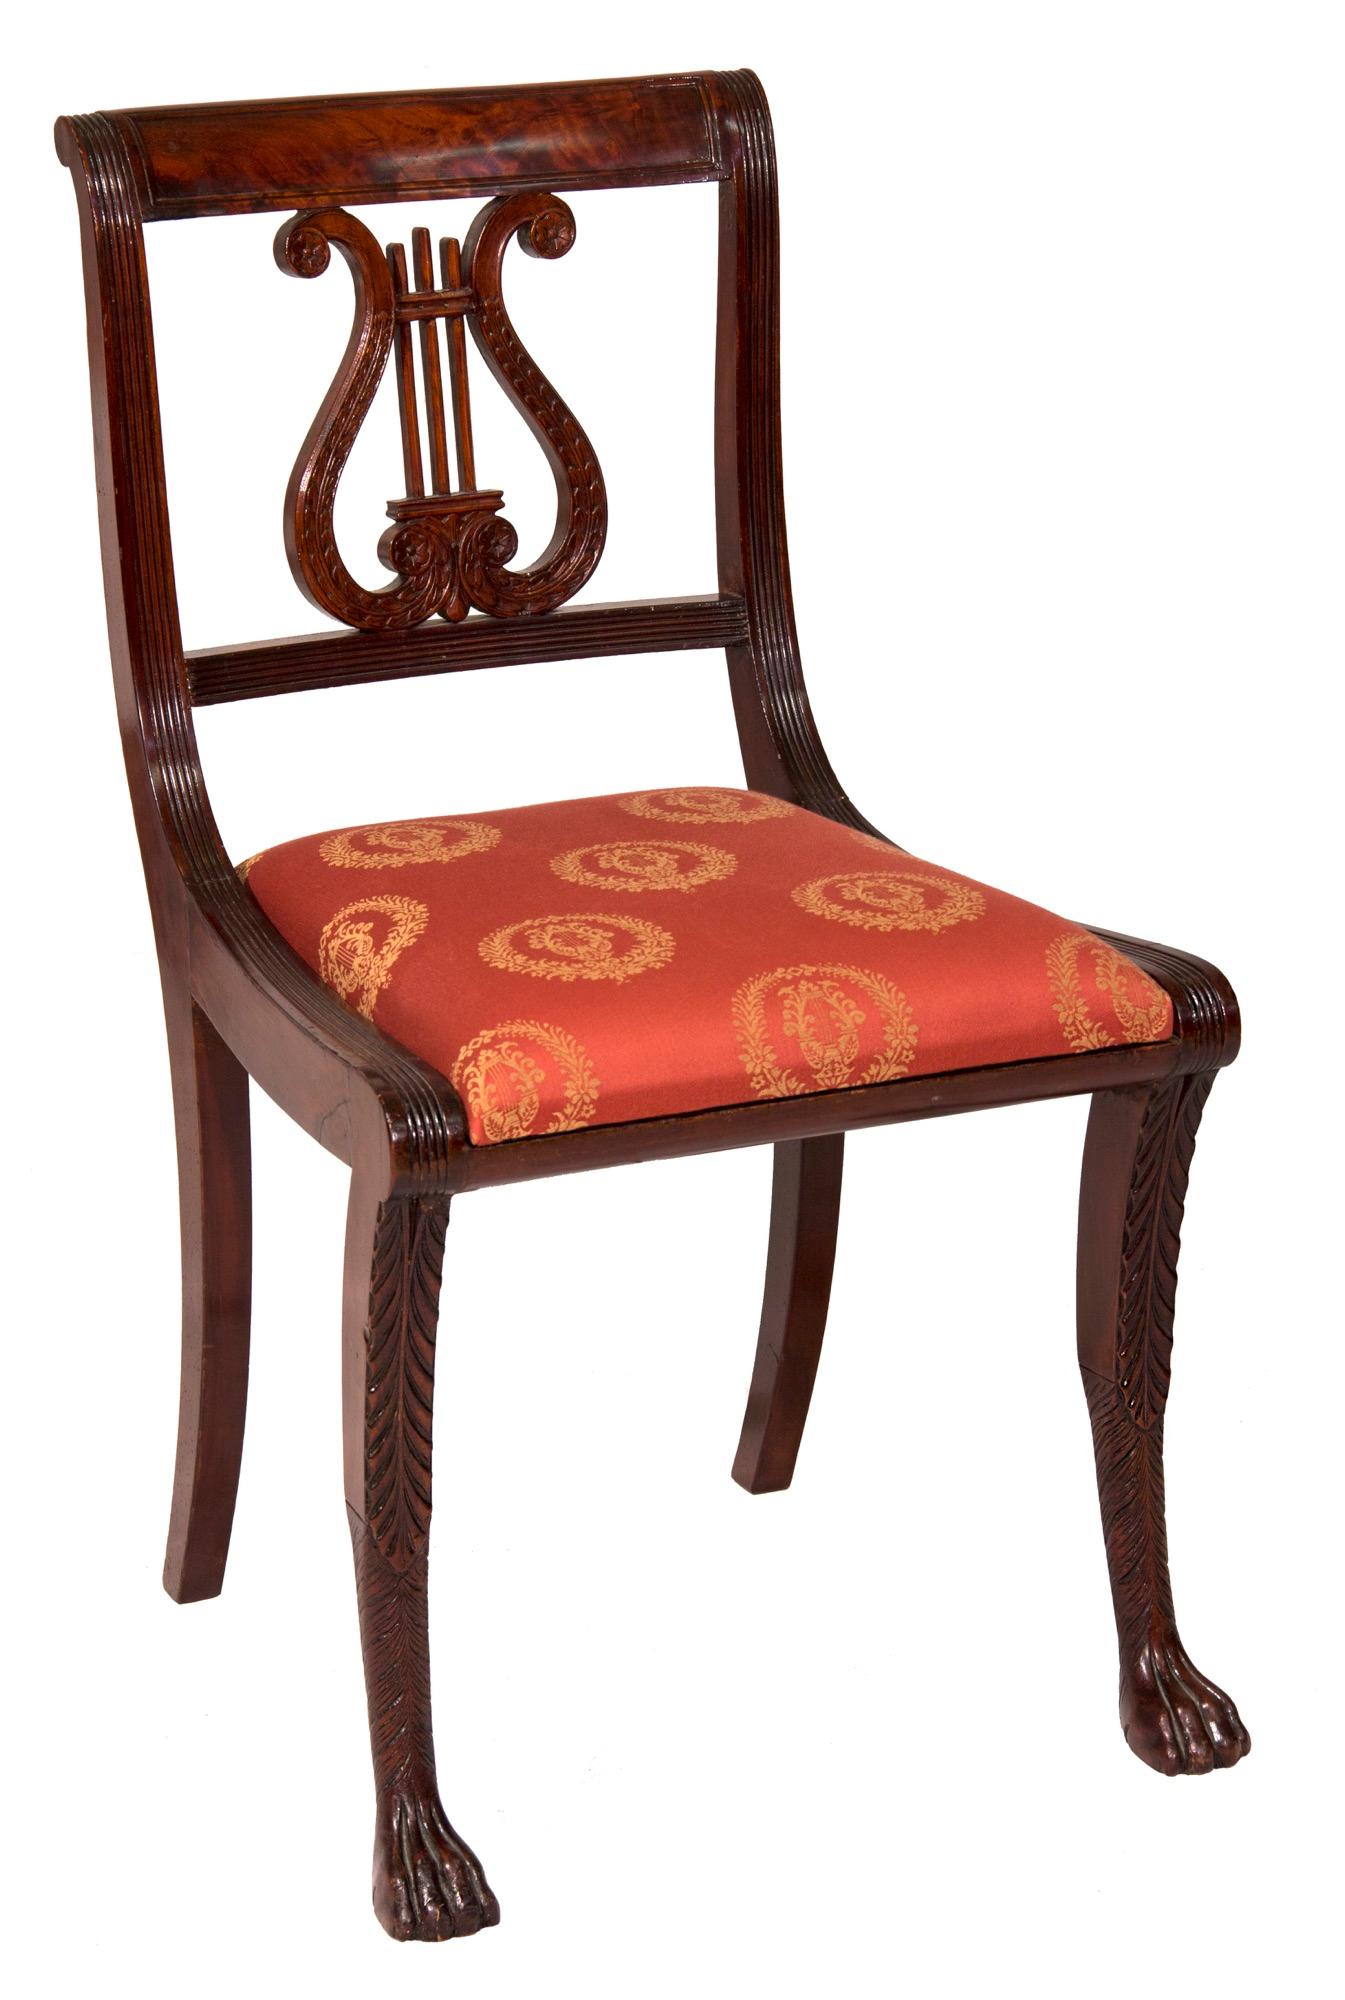 Illustrated: A nearly identical chair to this pair (but with applied carved roundels at the knees) is in the Yale University collection. See scanned page below from 300 Years of American Seating Furniture, Patricia E. Kane, (cat. no. 157).